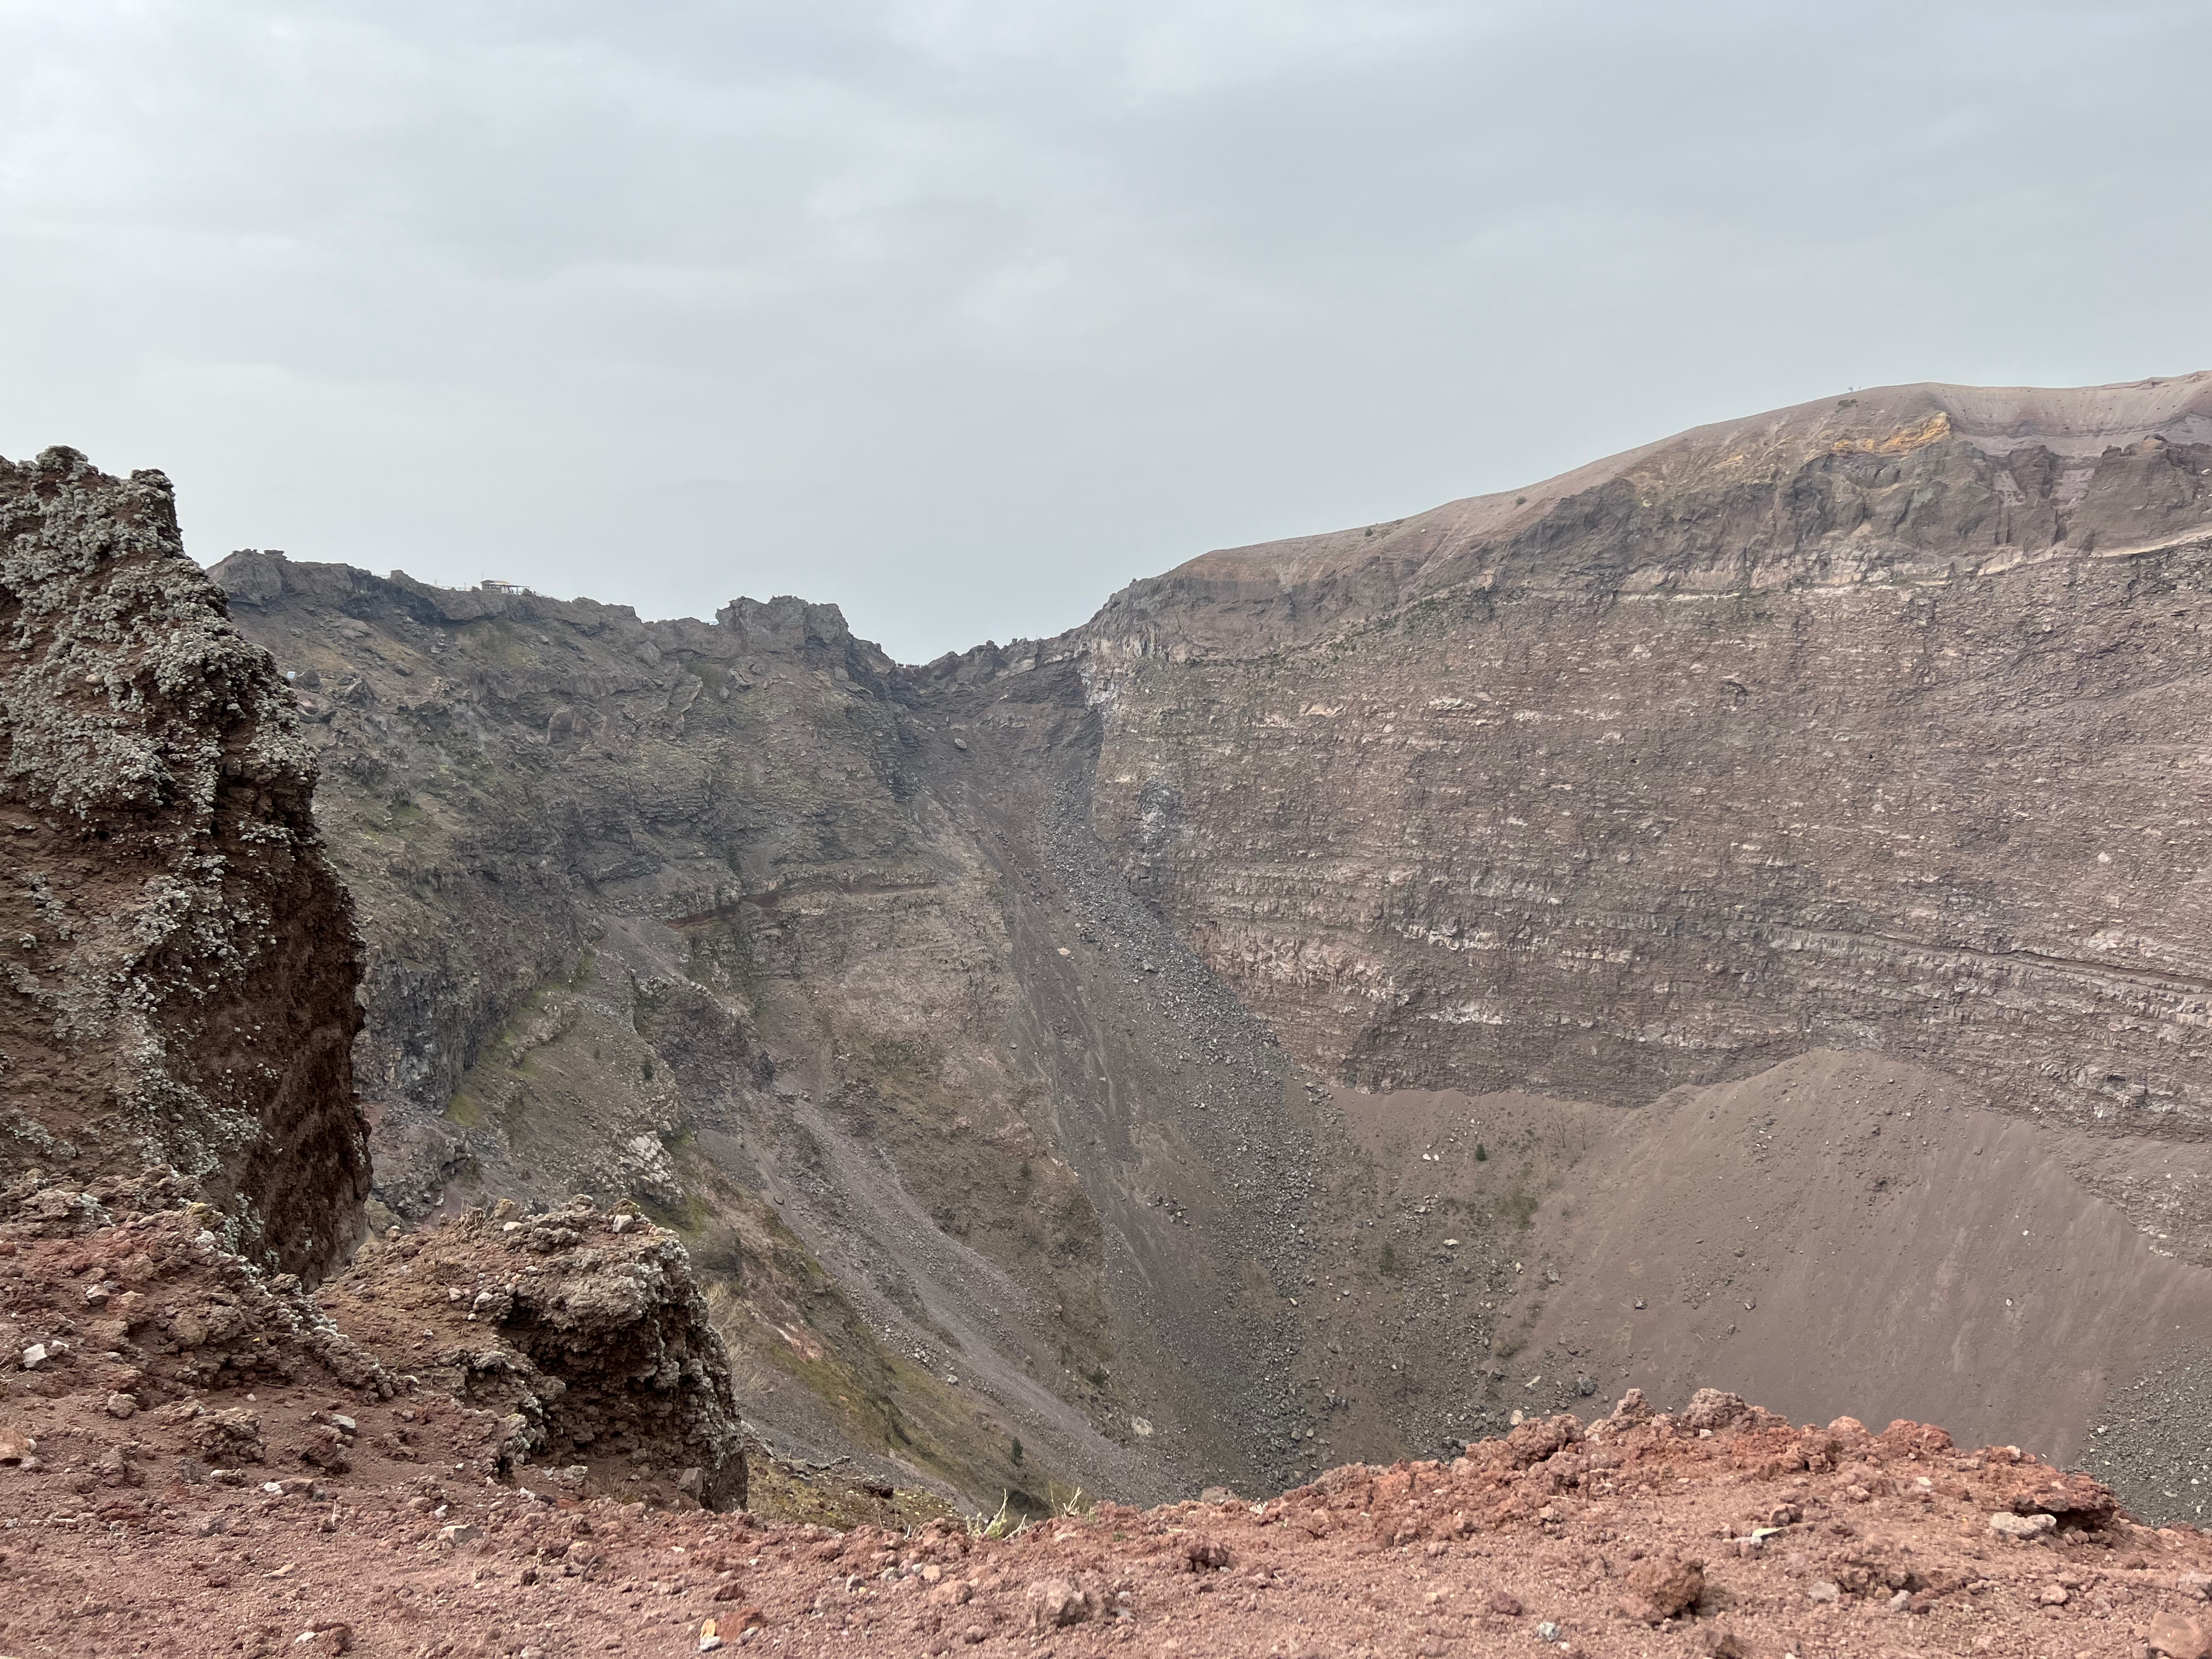 View into the crater of Vesuvius